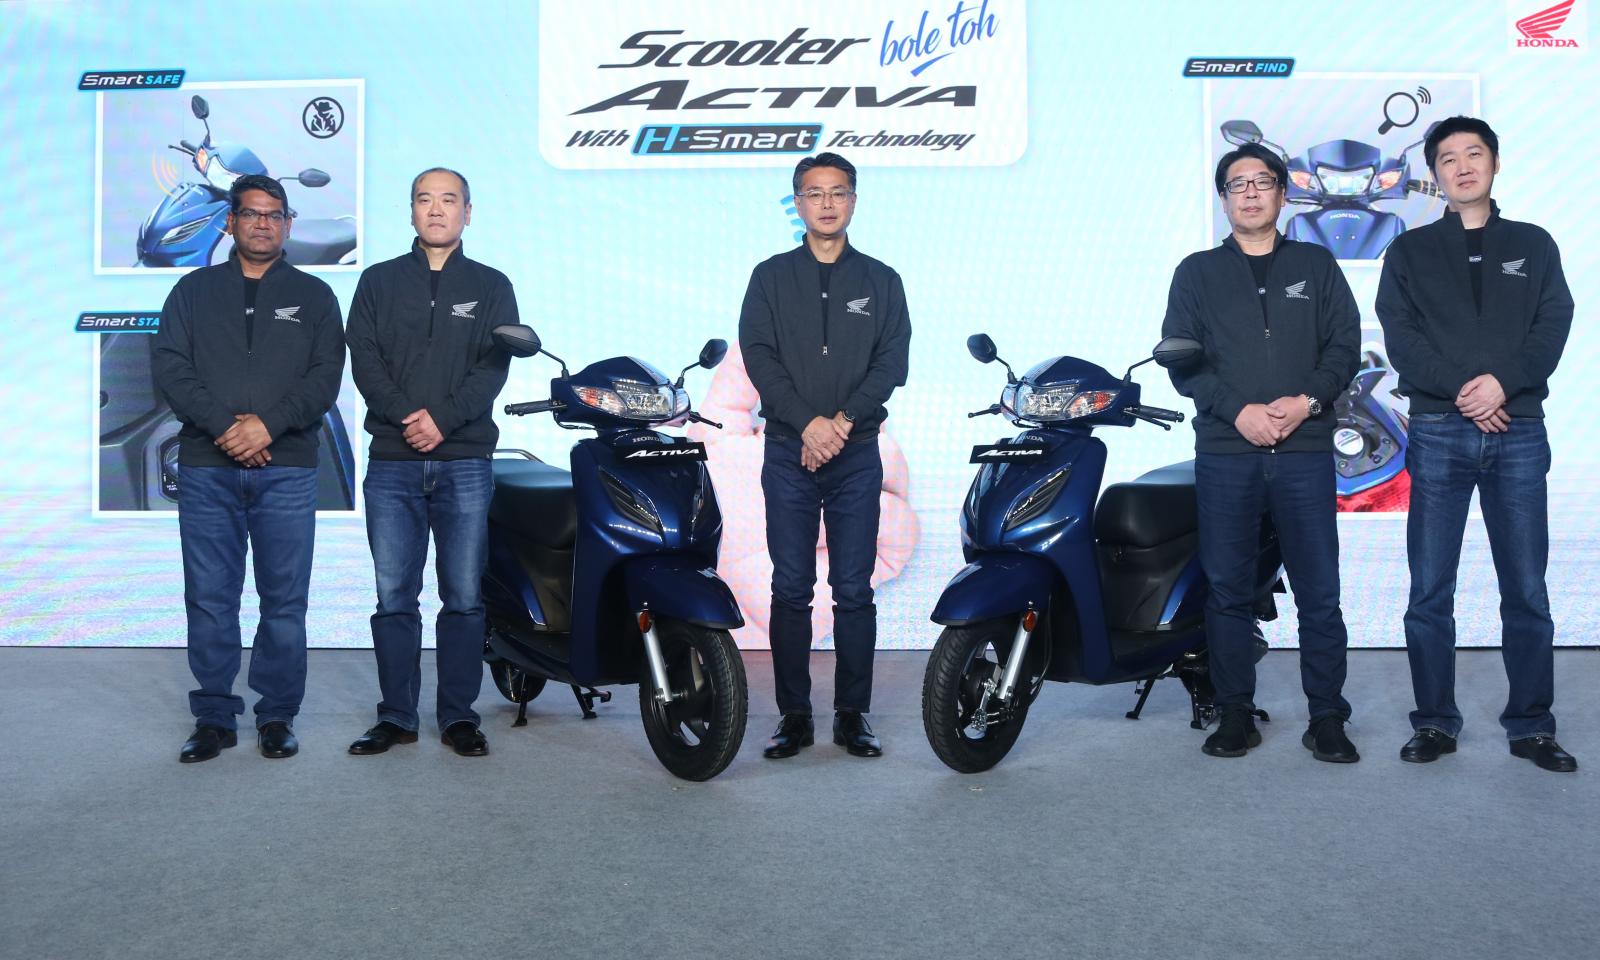 Honda Activa Gets Smarter, Now Comes With Smart Key System